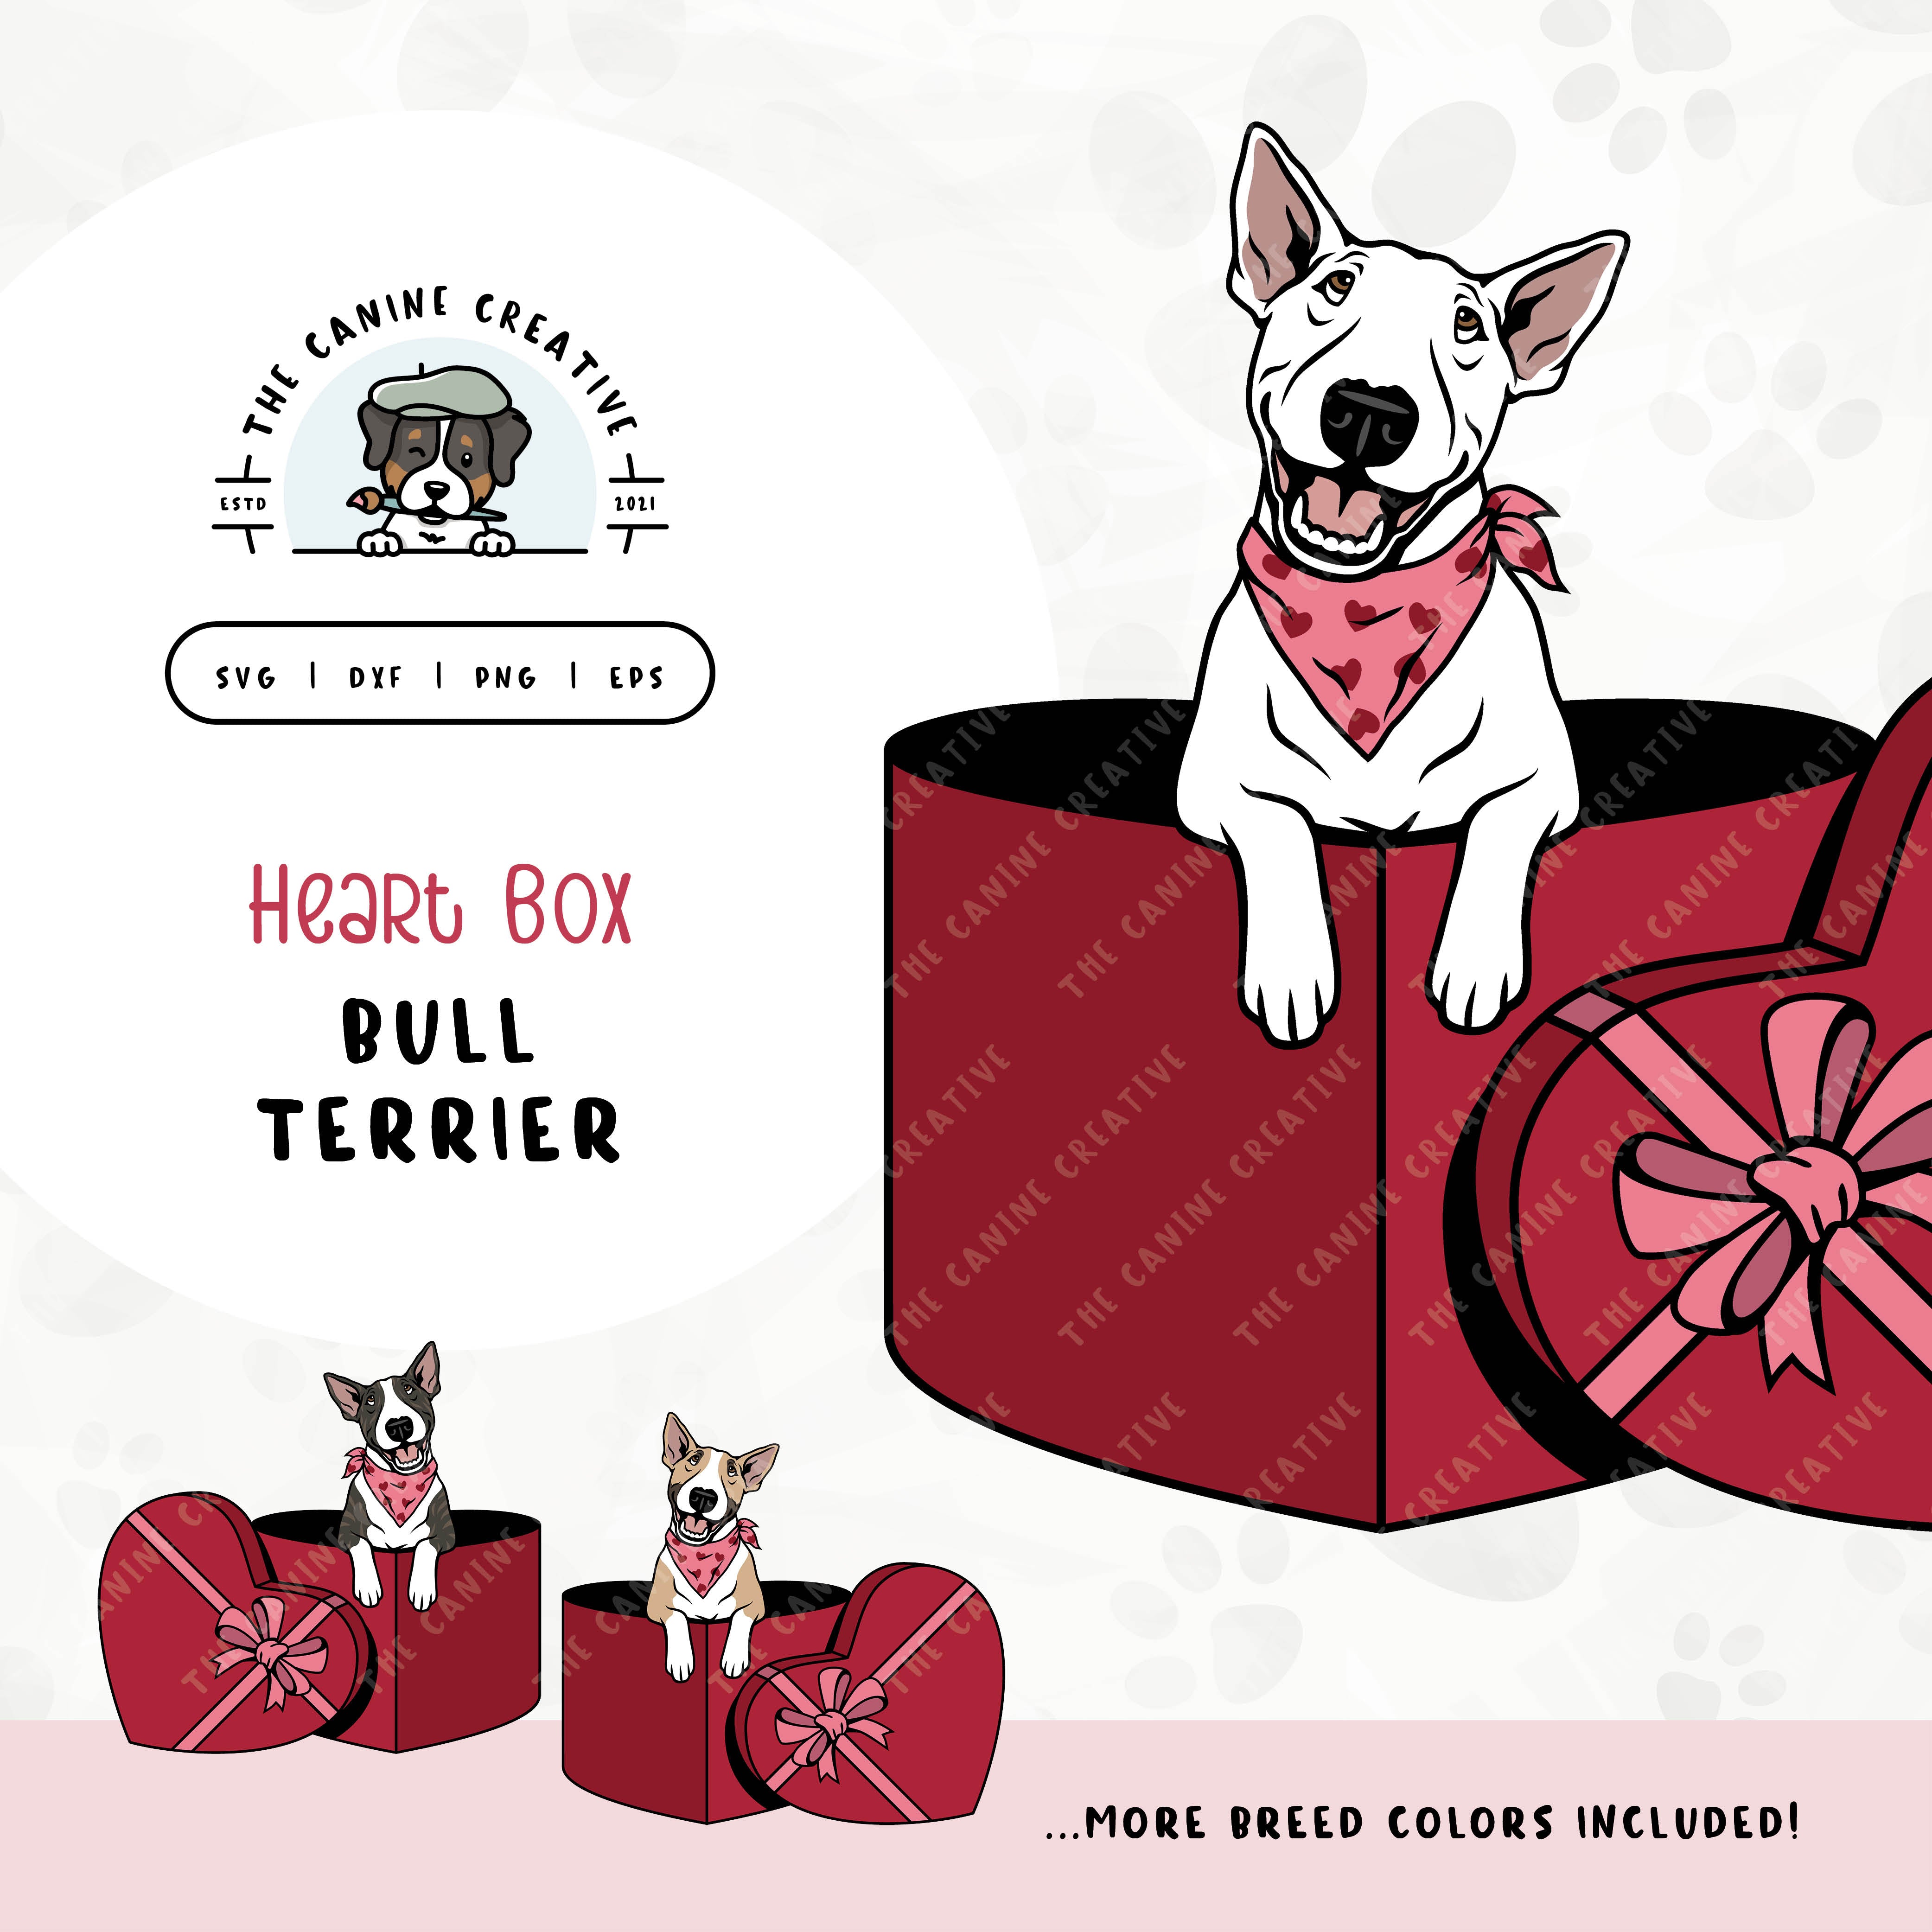 This charming Bull Terrier illustration features a peeking dog in a heart-shaped box. File formats include: SVG, DXF, PNG, and EPS.